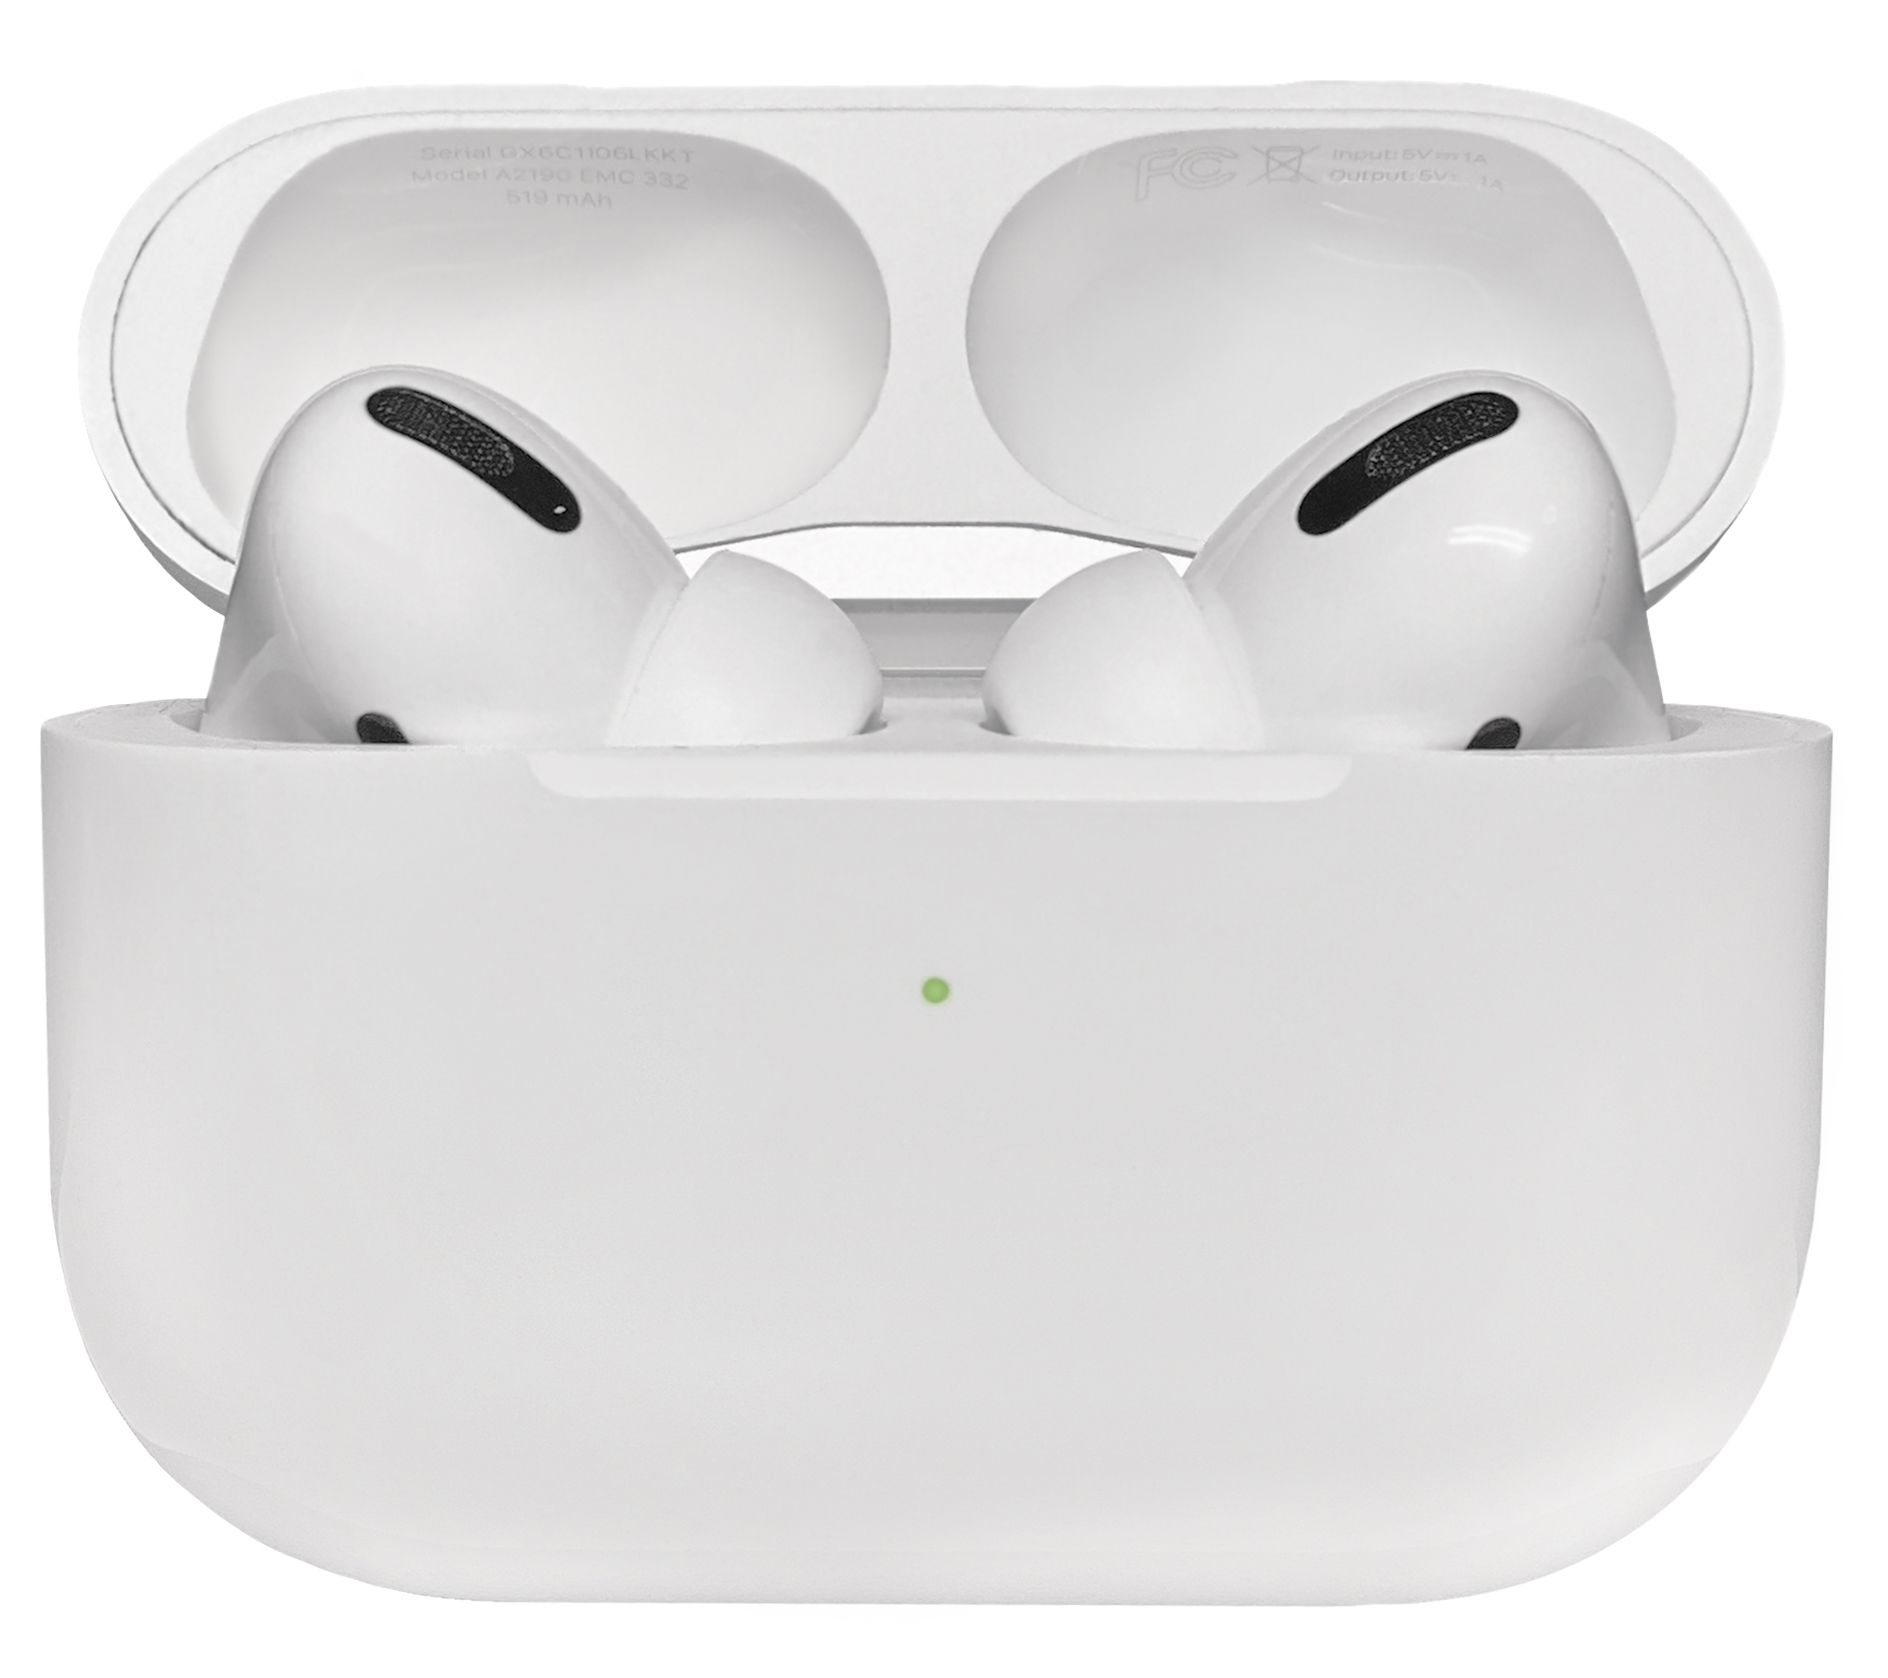 Apple AirPod Pro 2nd Generation with MagSafe Case & Voucher - QVC.com